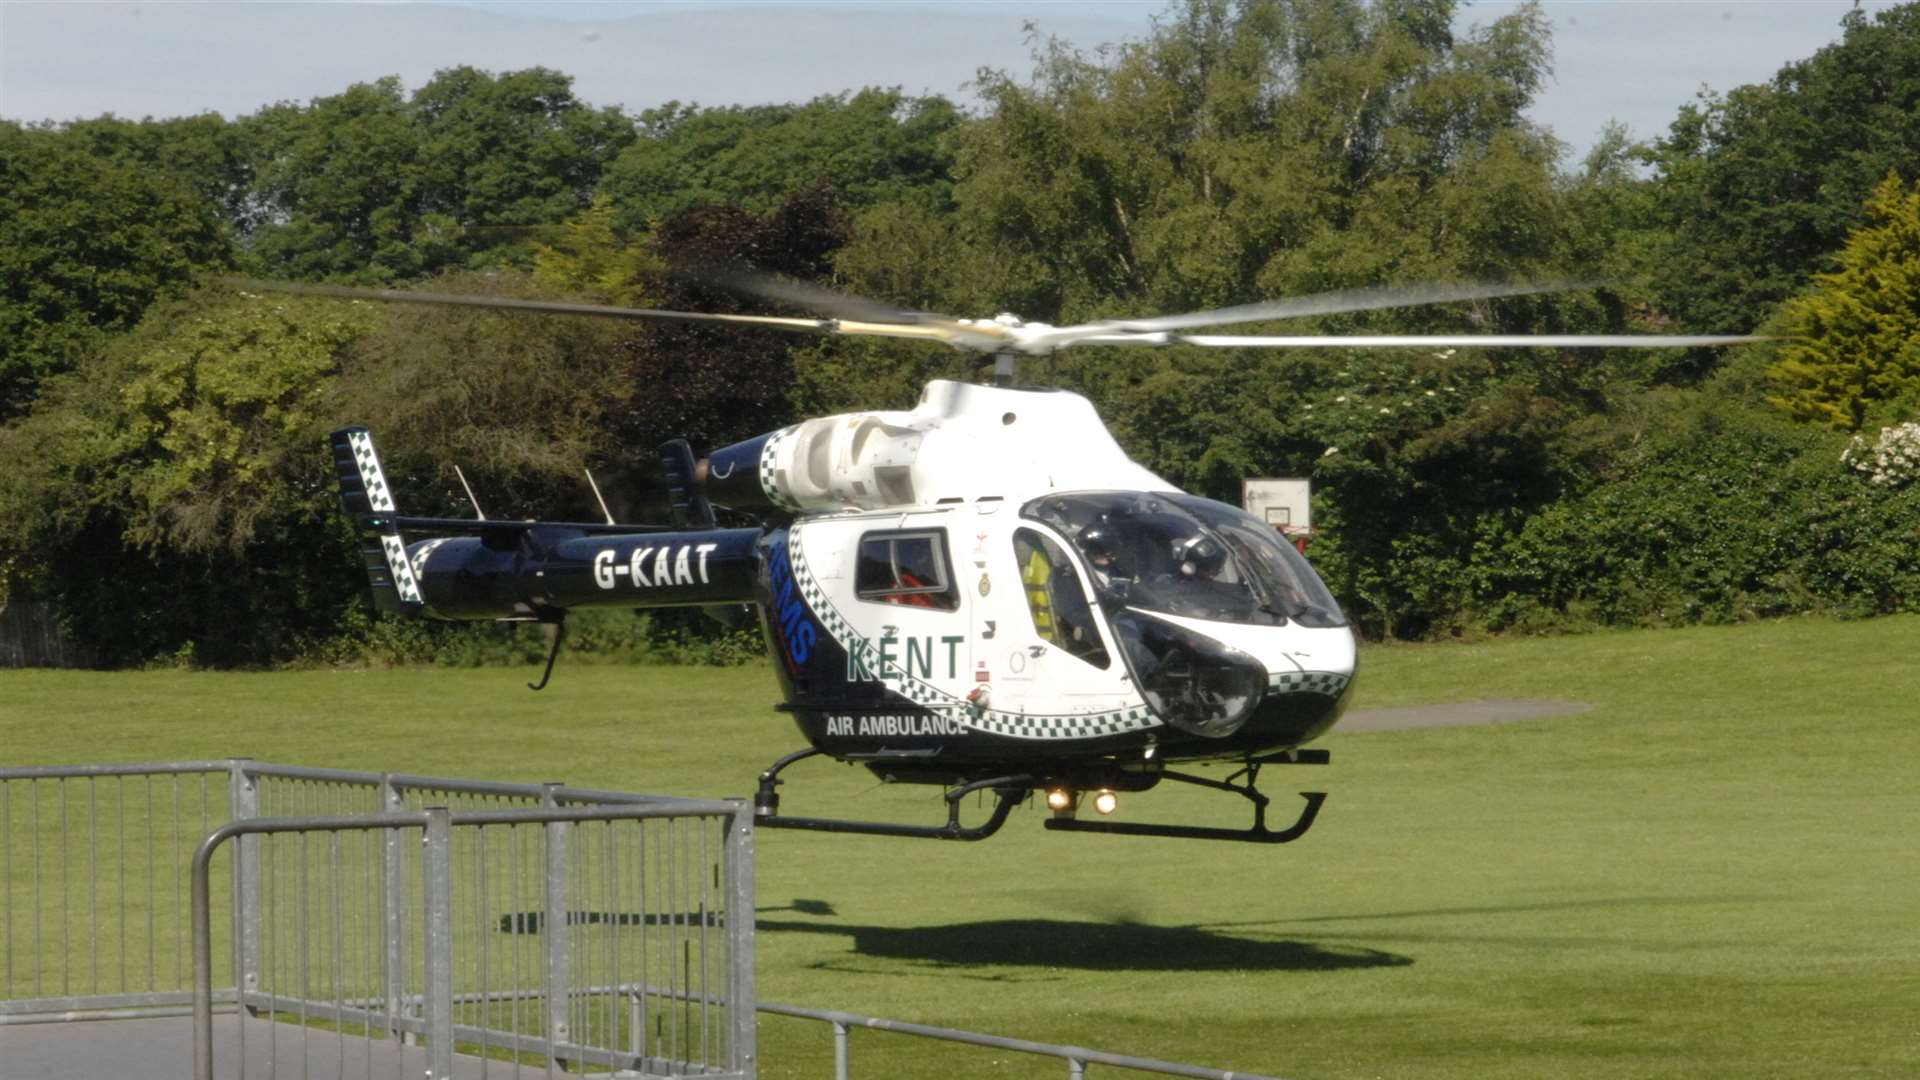 The air ambulance was sent to the scene. Stock image by Chris Davey